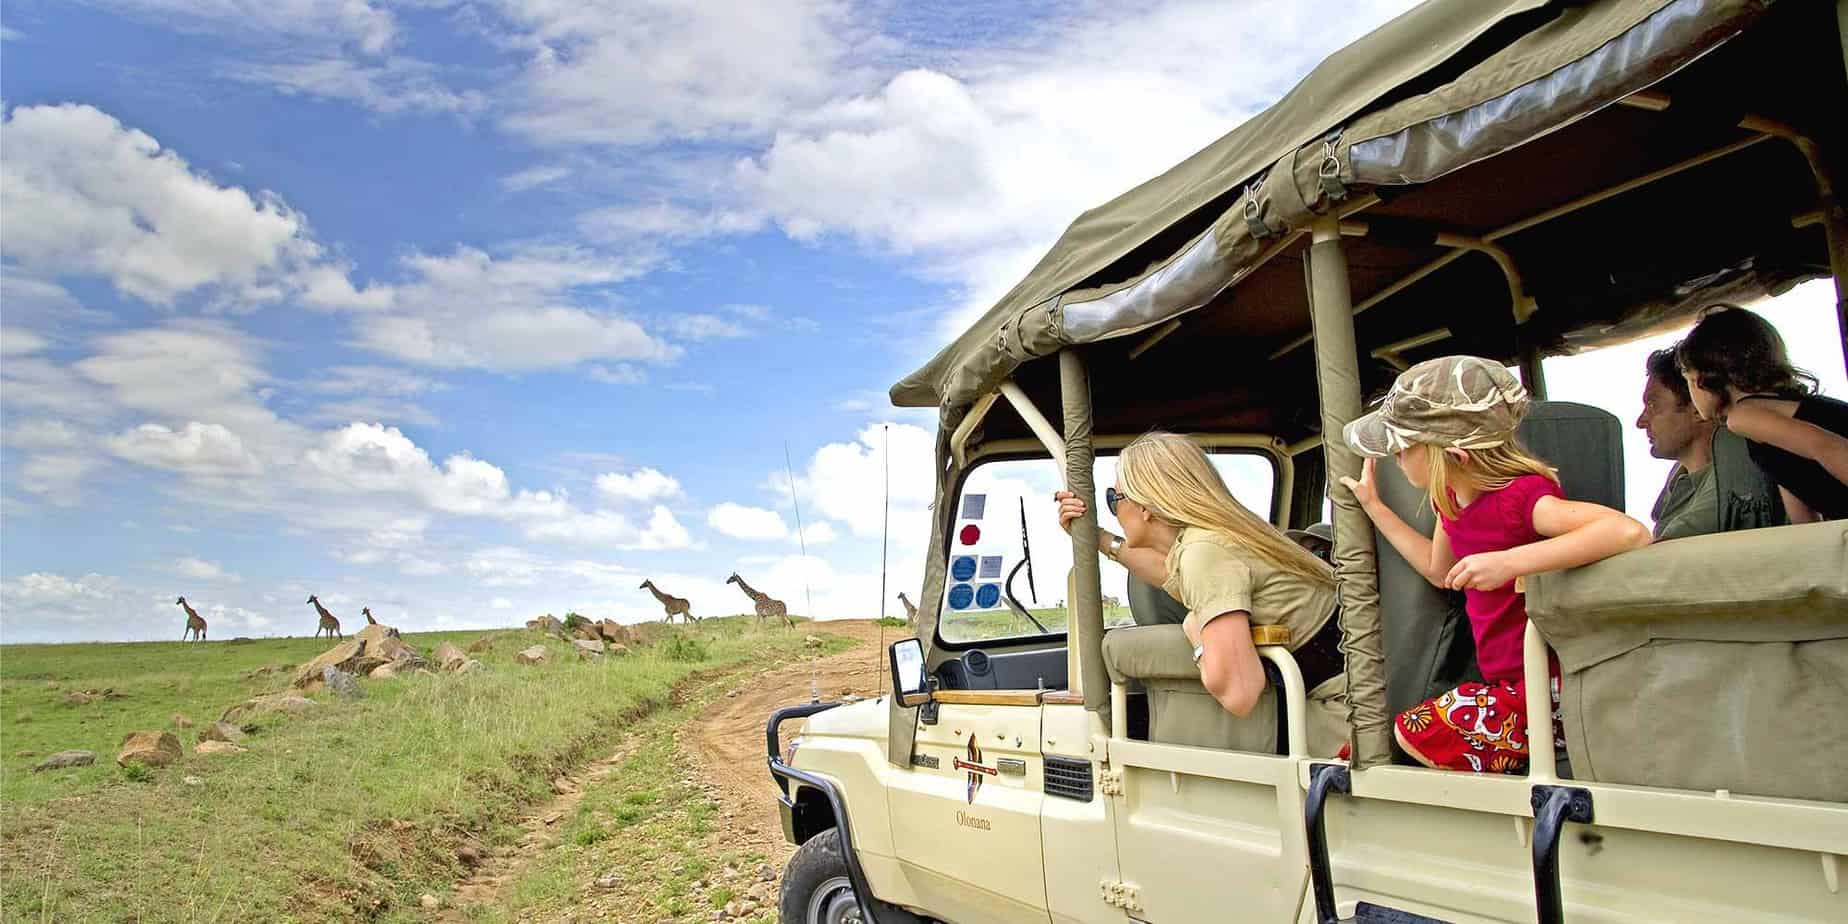 African safari tours: from wildlife to nightlife, Africa has it all